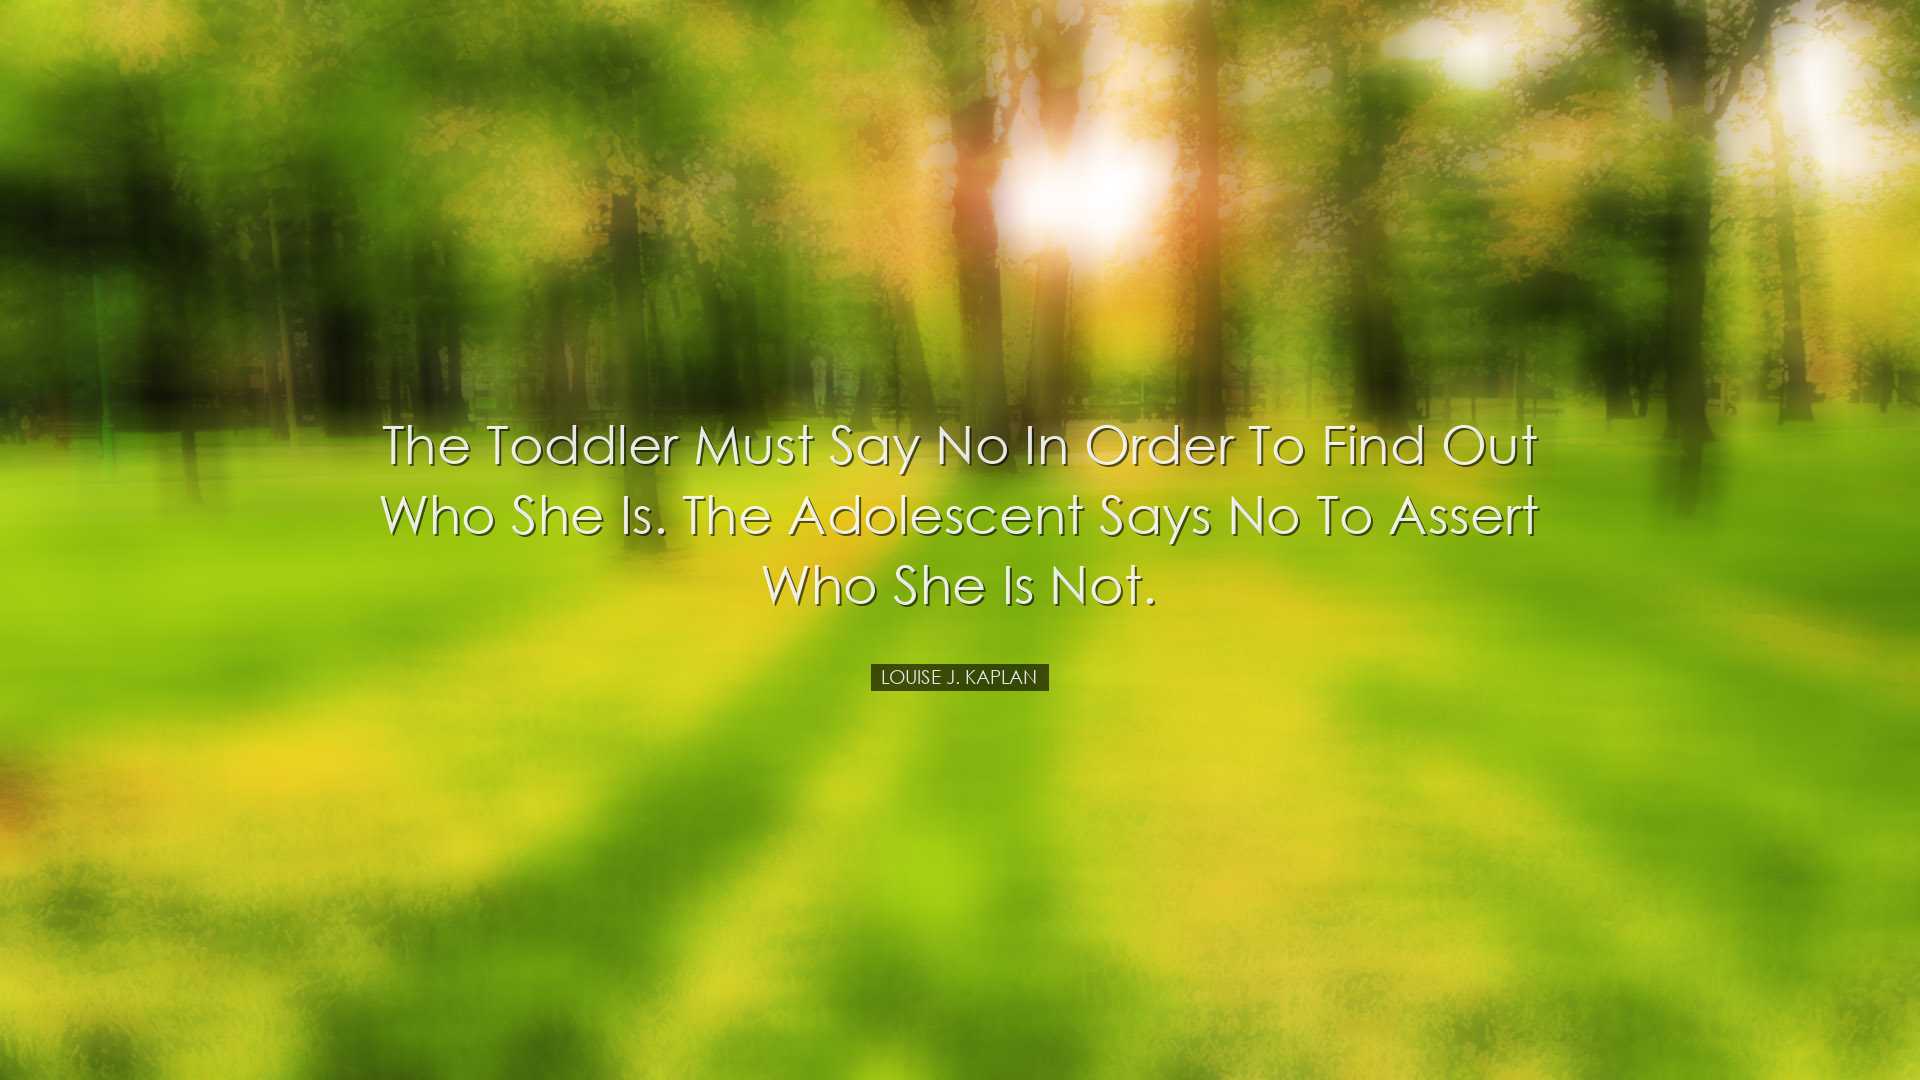 The toddler must say no in order to find out who she is. The adole